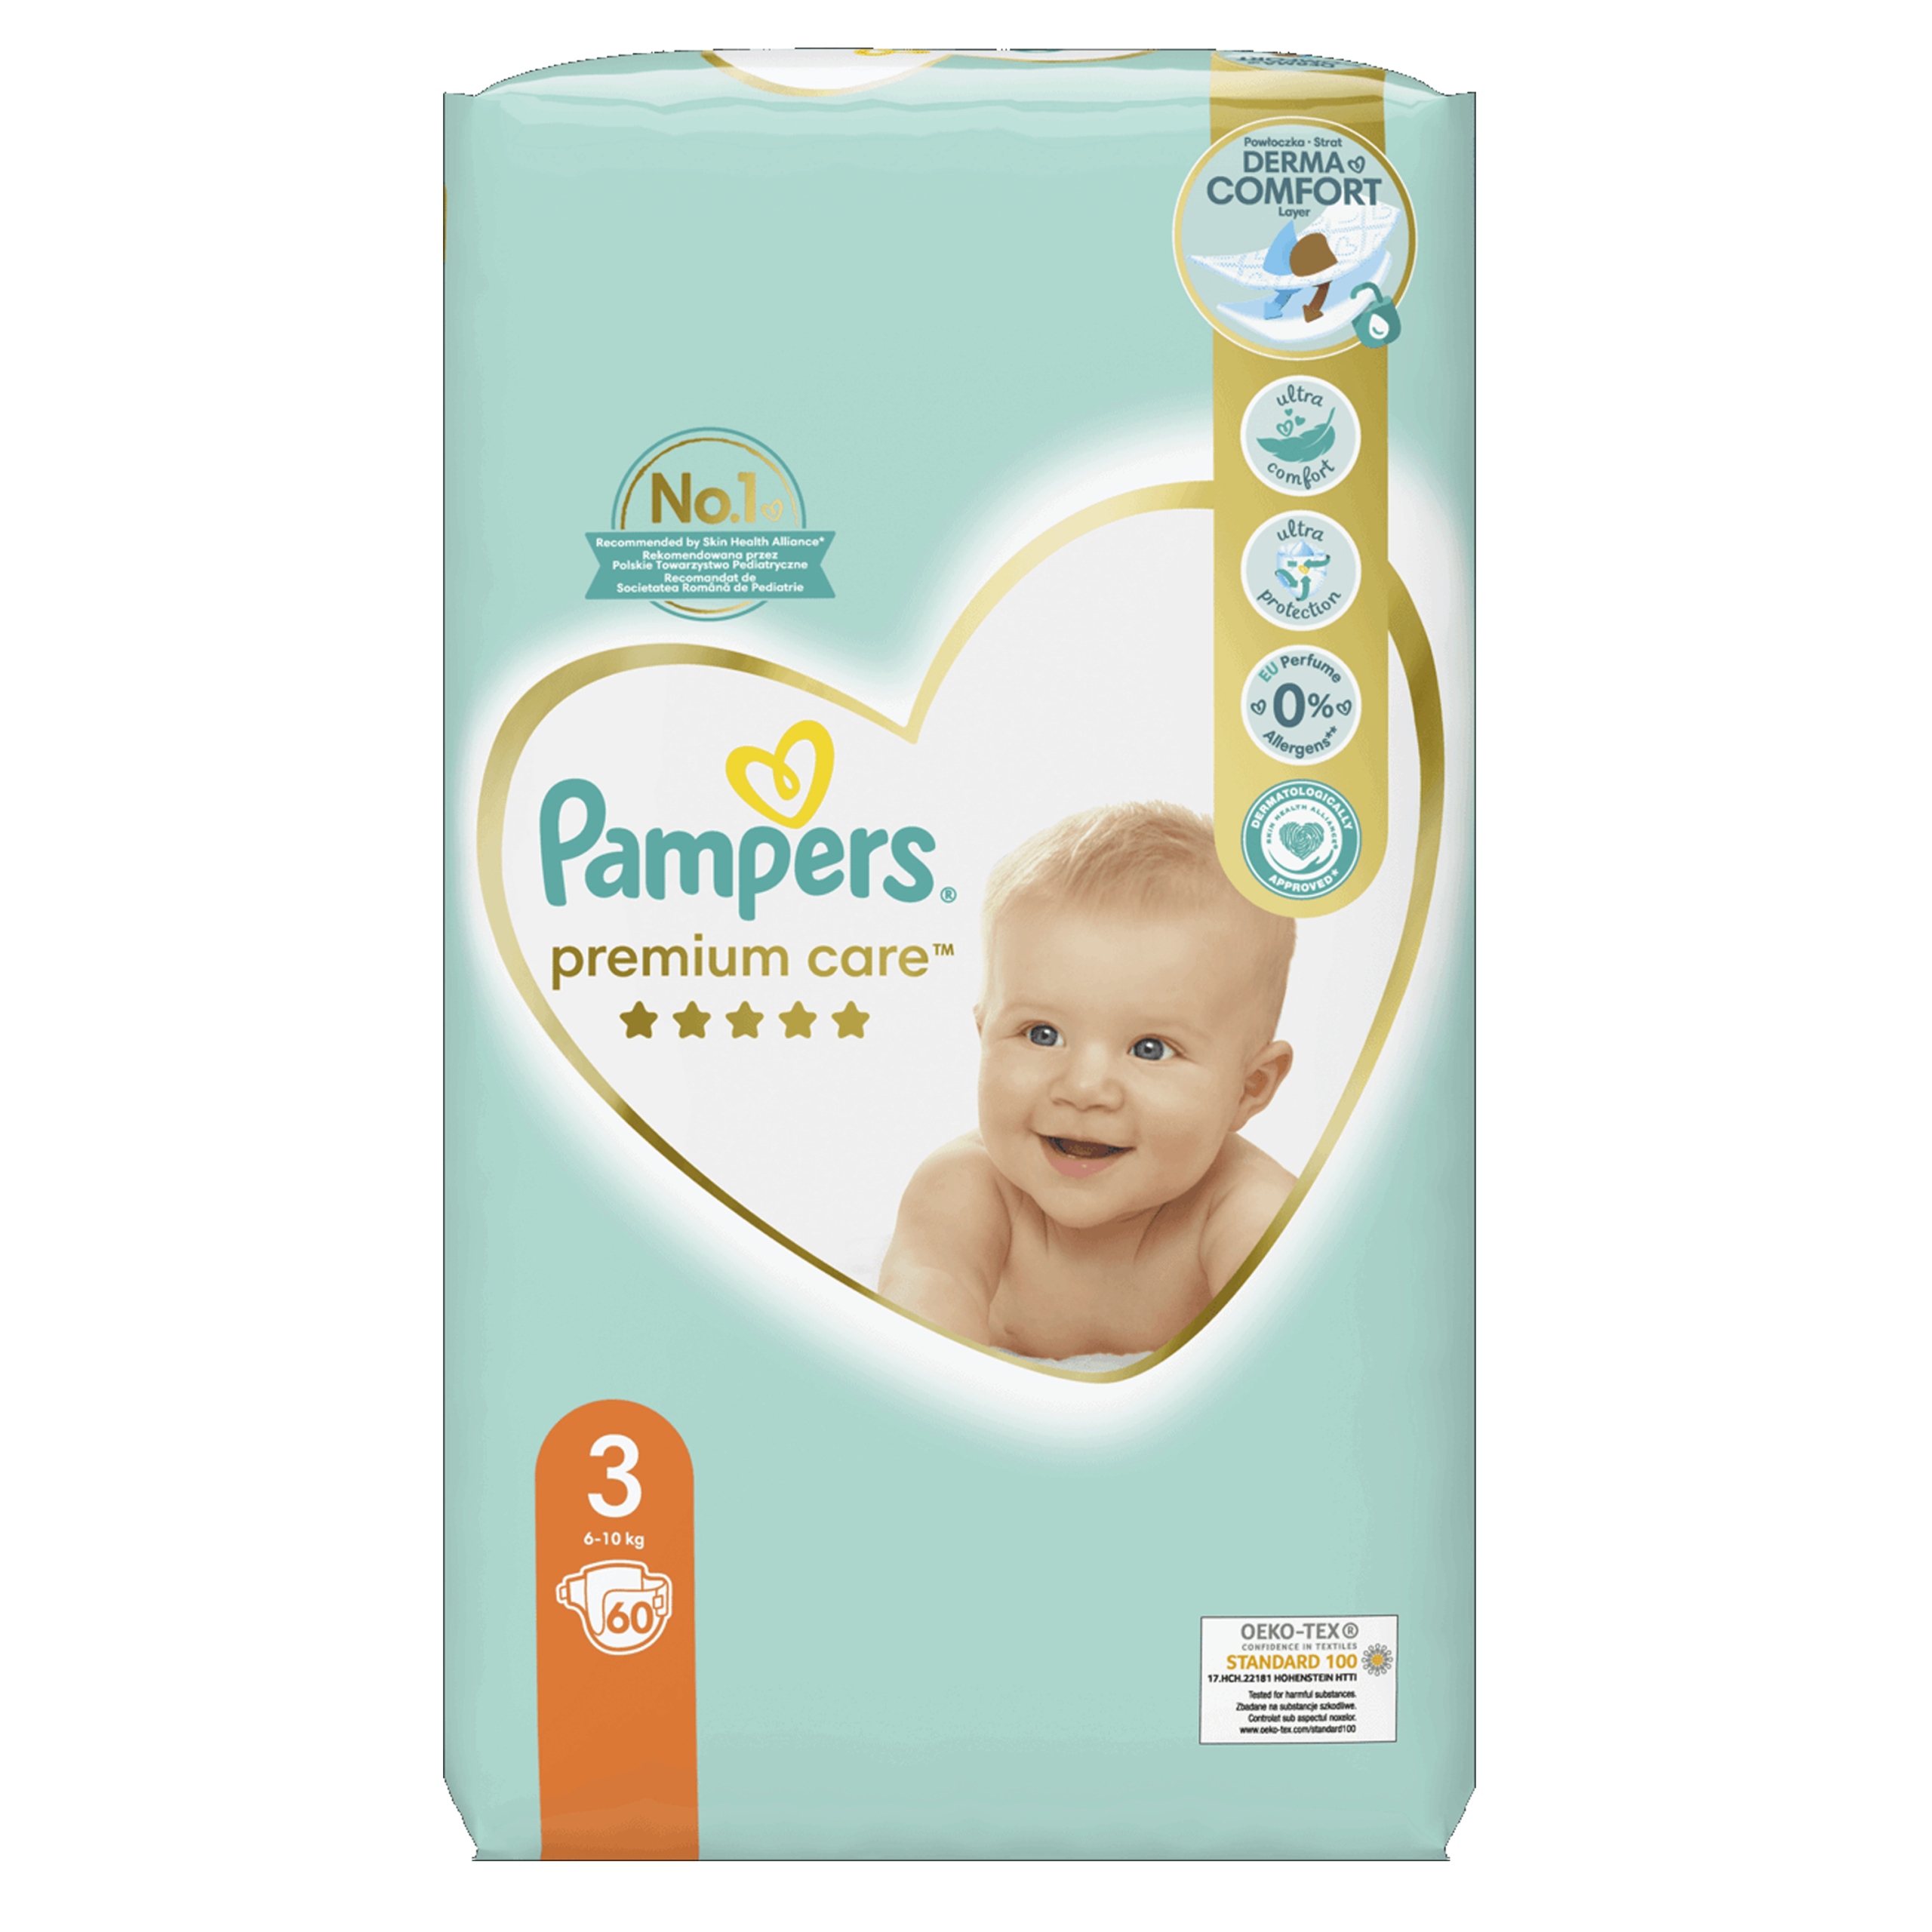 casting pampers 2019